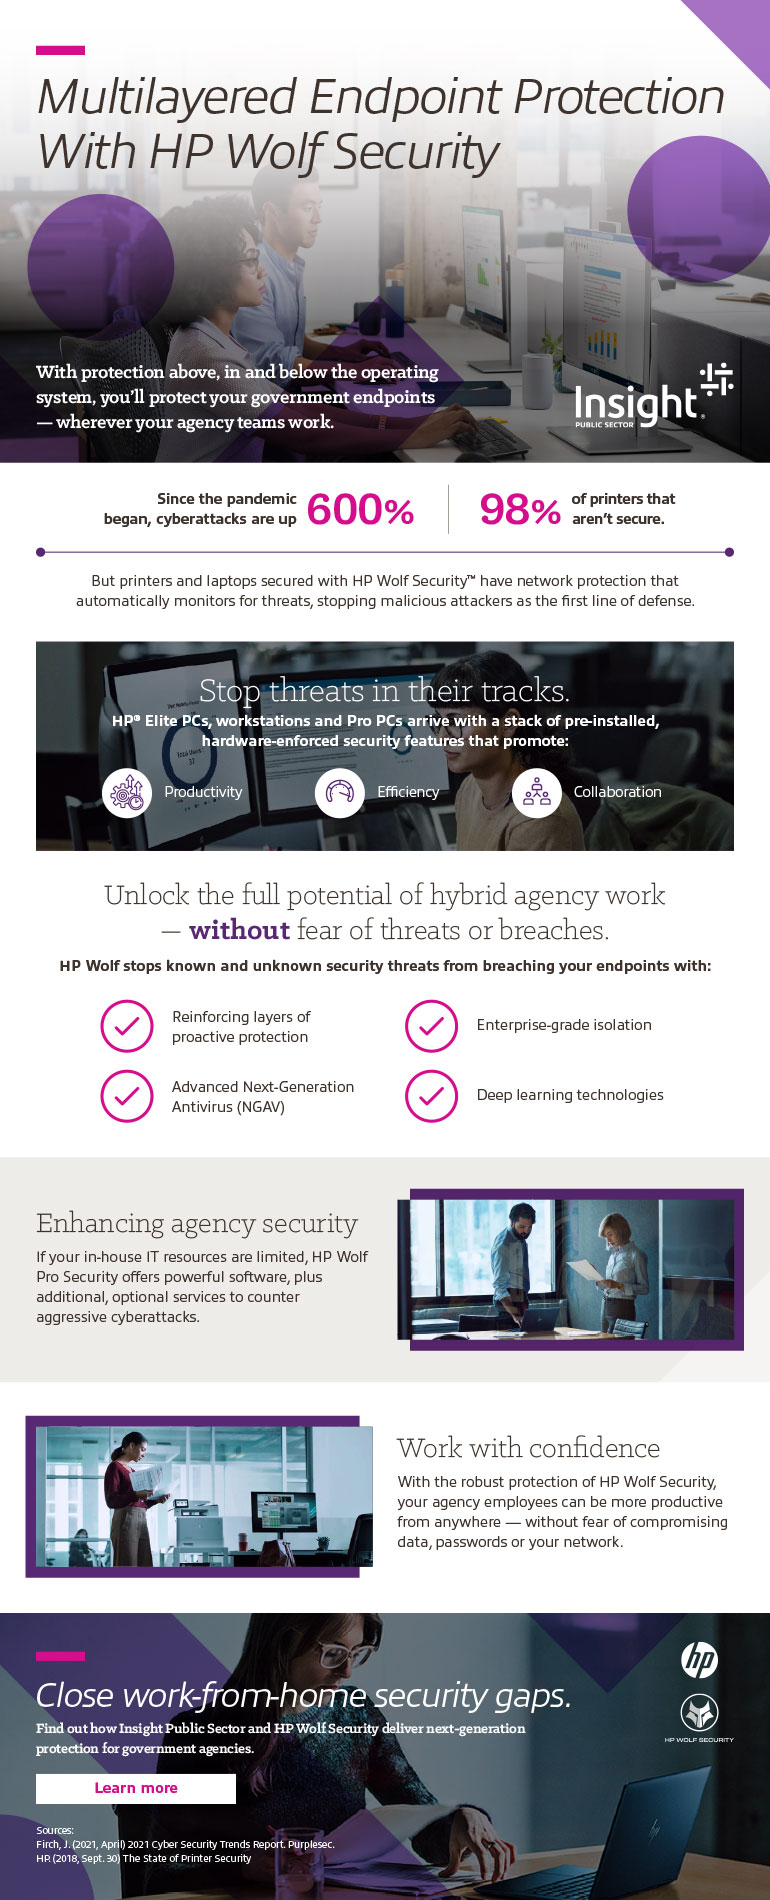 Multilayered Endpoint Protection With HP Wolf Security infographic 